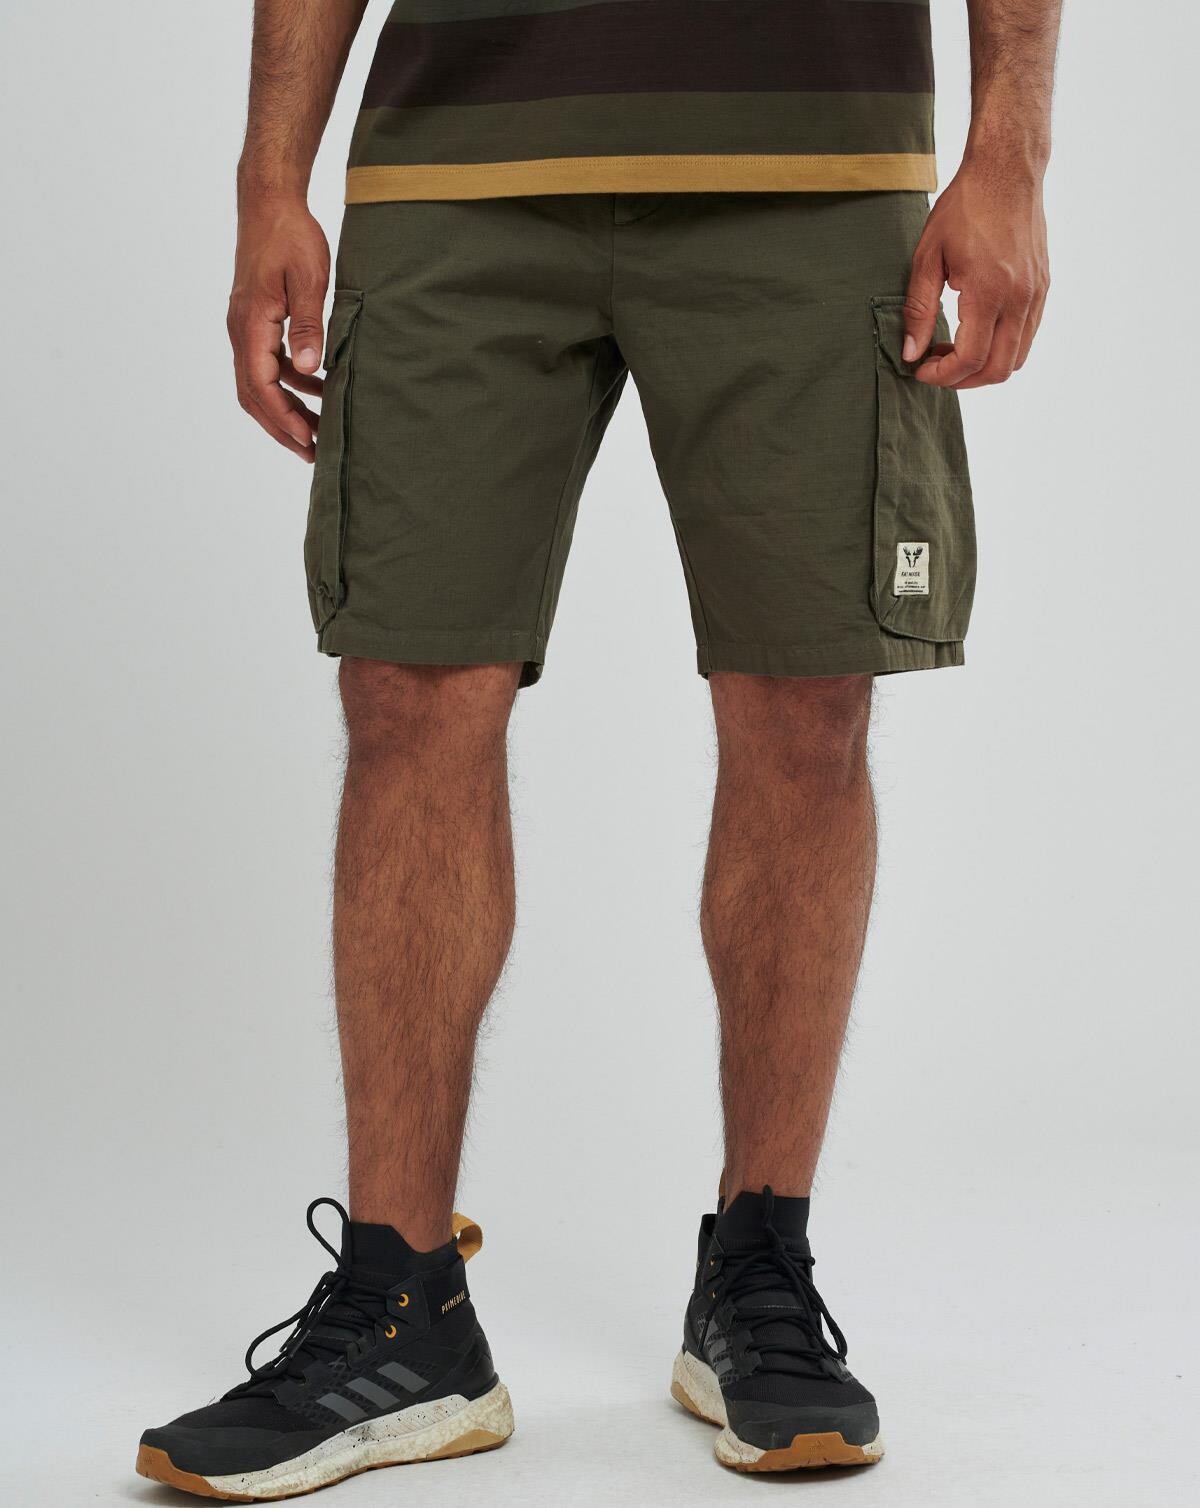 #3 - Fat Moose Tap Cargo Shorts (Oliven, XL)